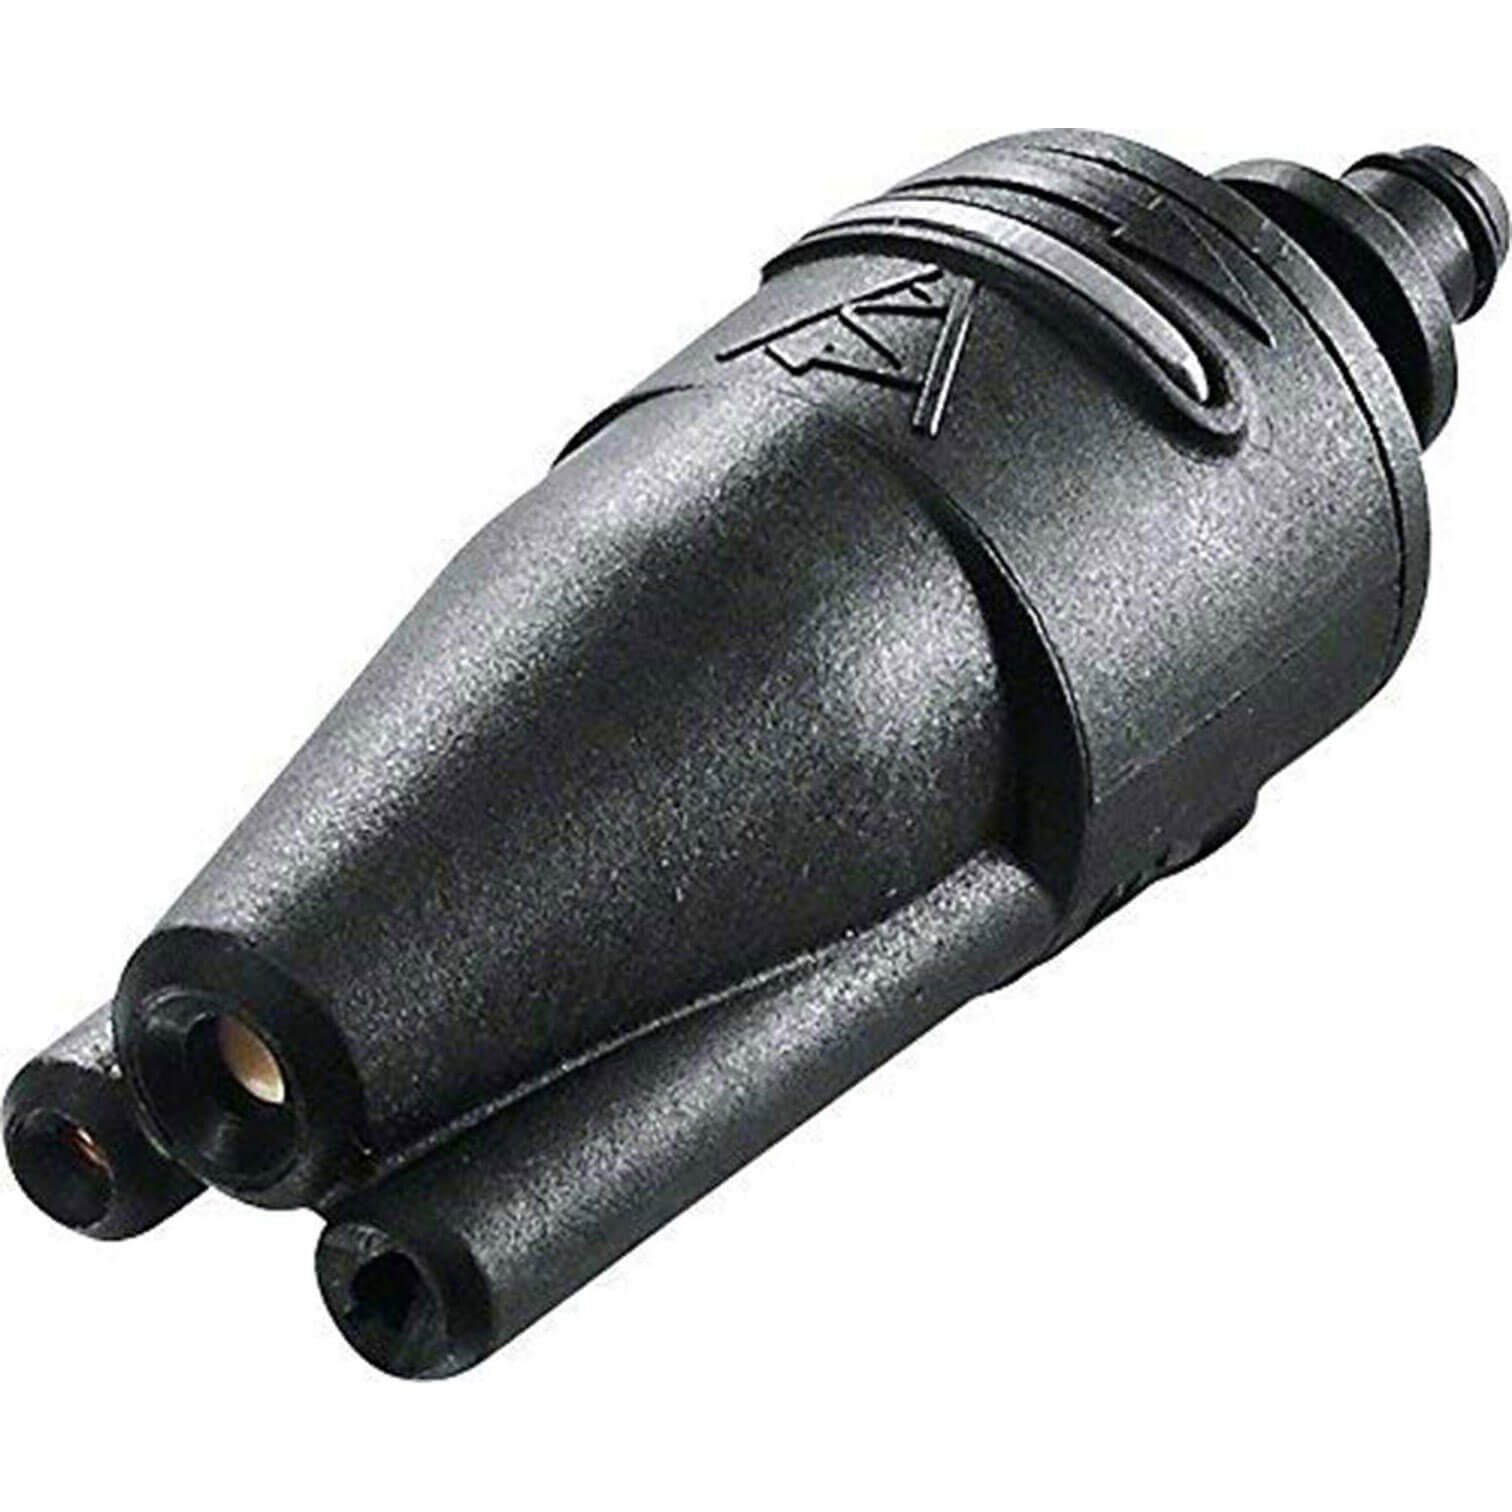 Image of Bosch 3 in 1 Nozzle for AQT Pressure Washers